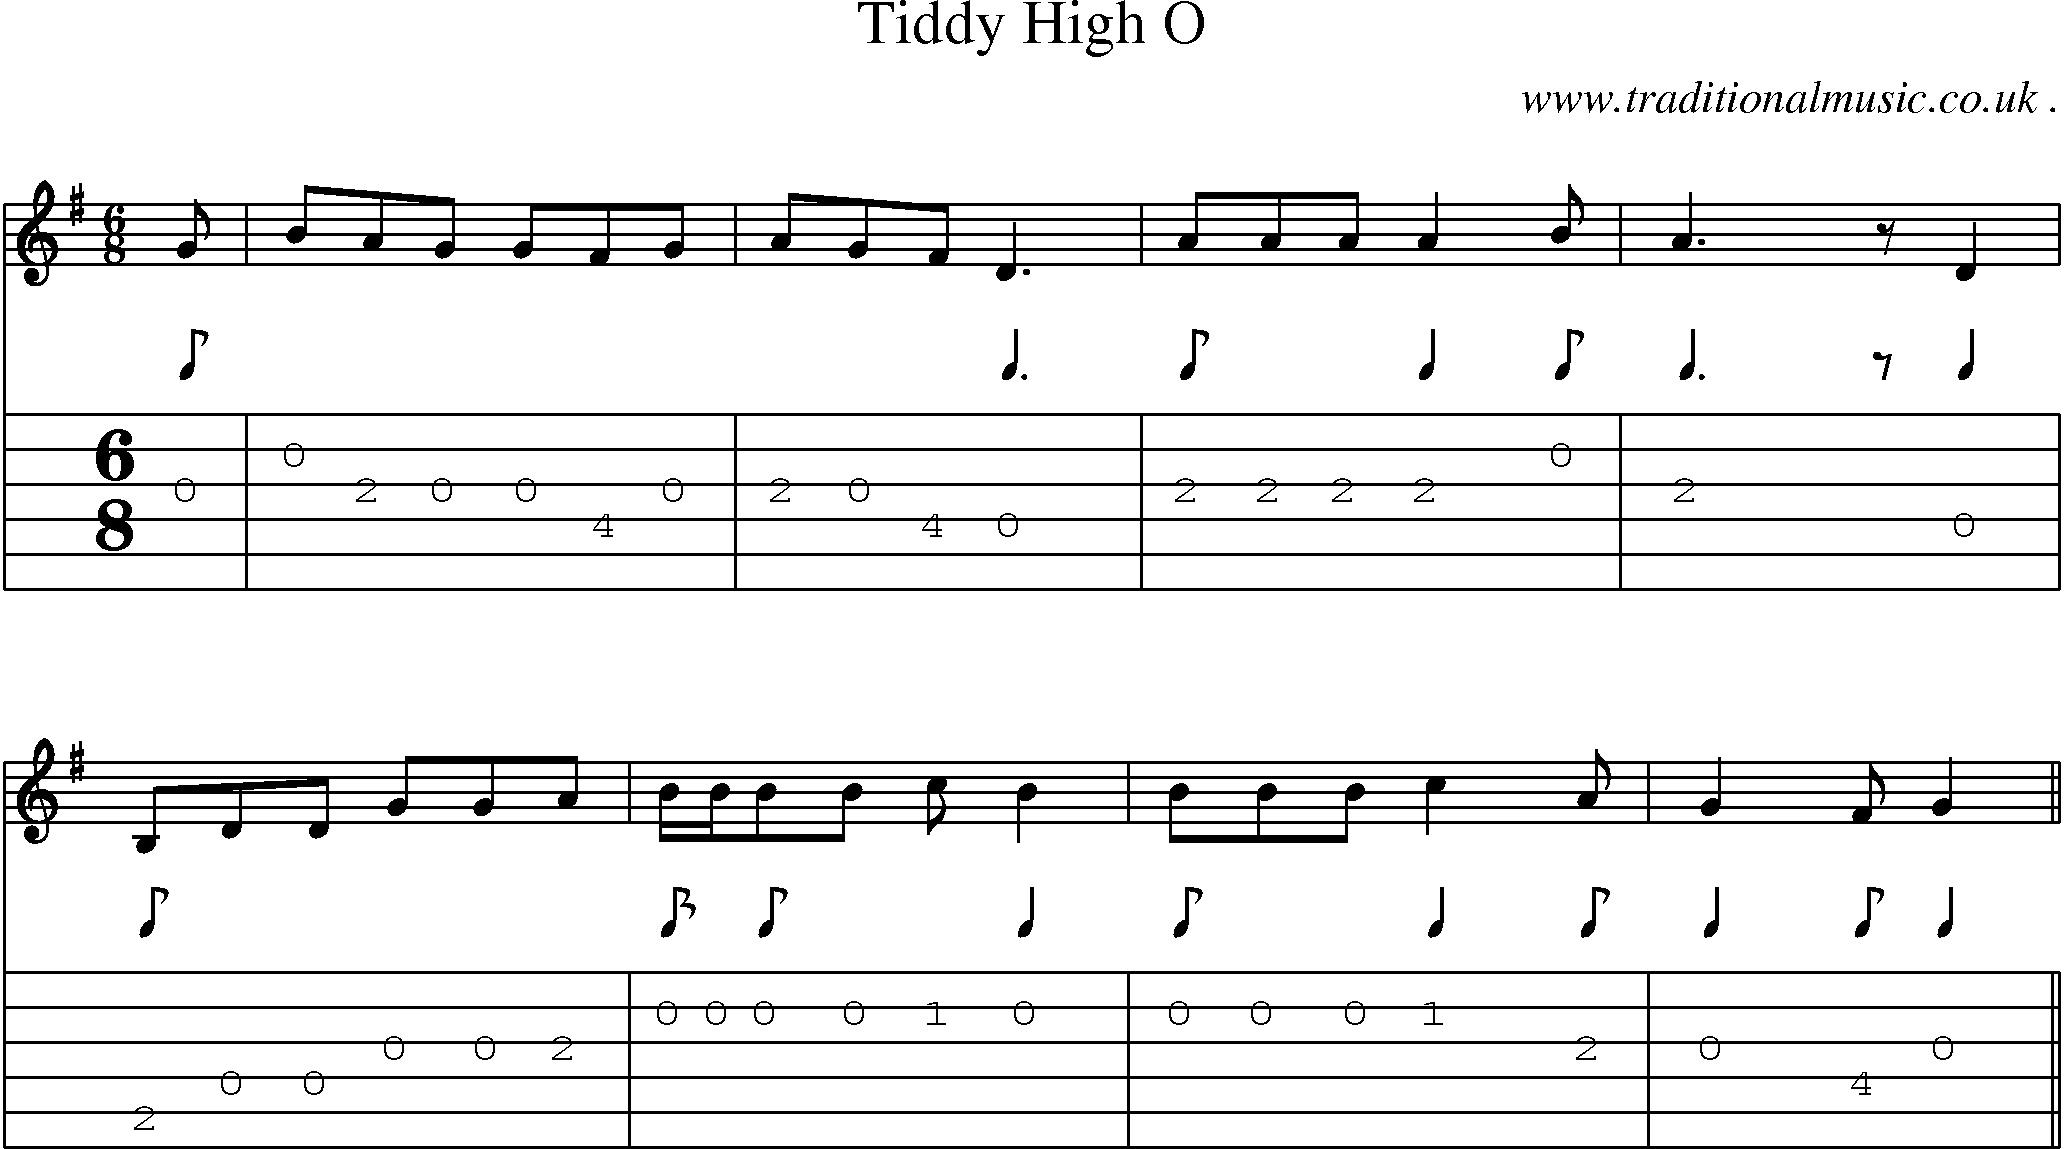 Sheet-Music and Guitar Tabs for Tiddy High O